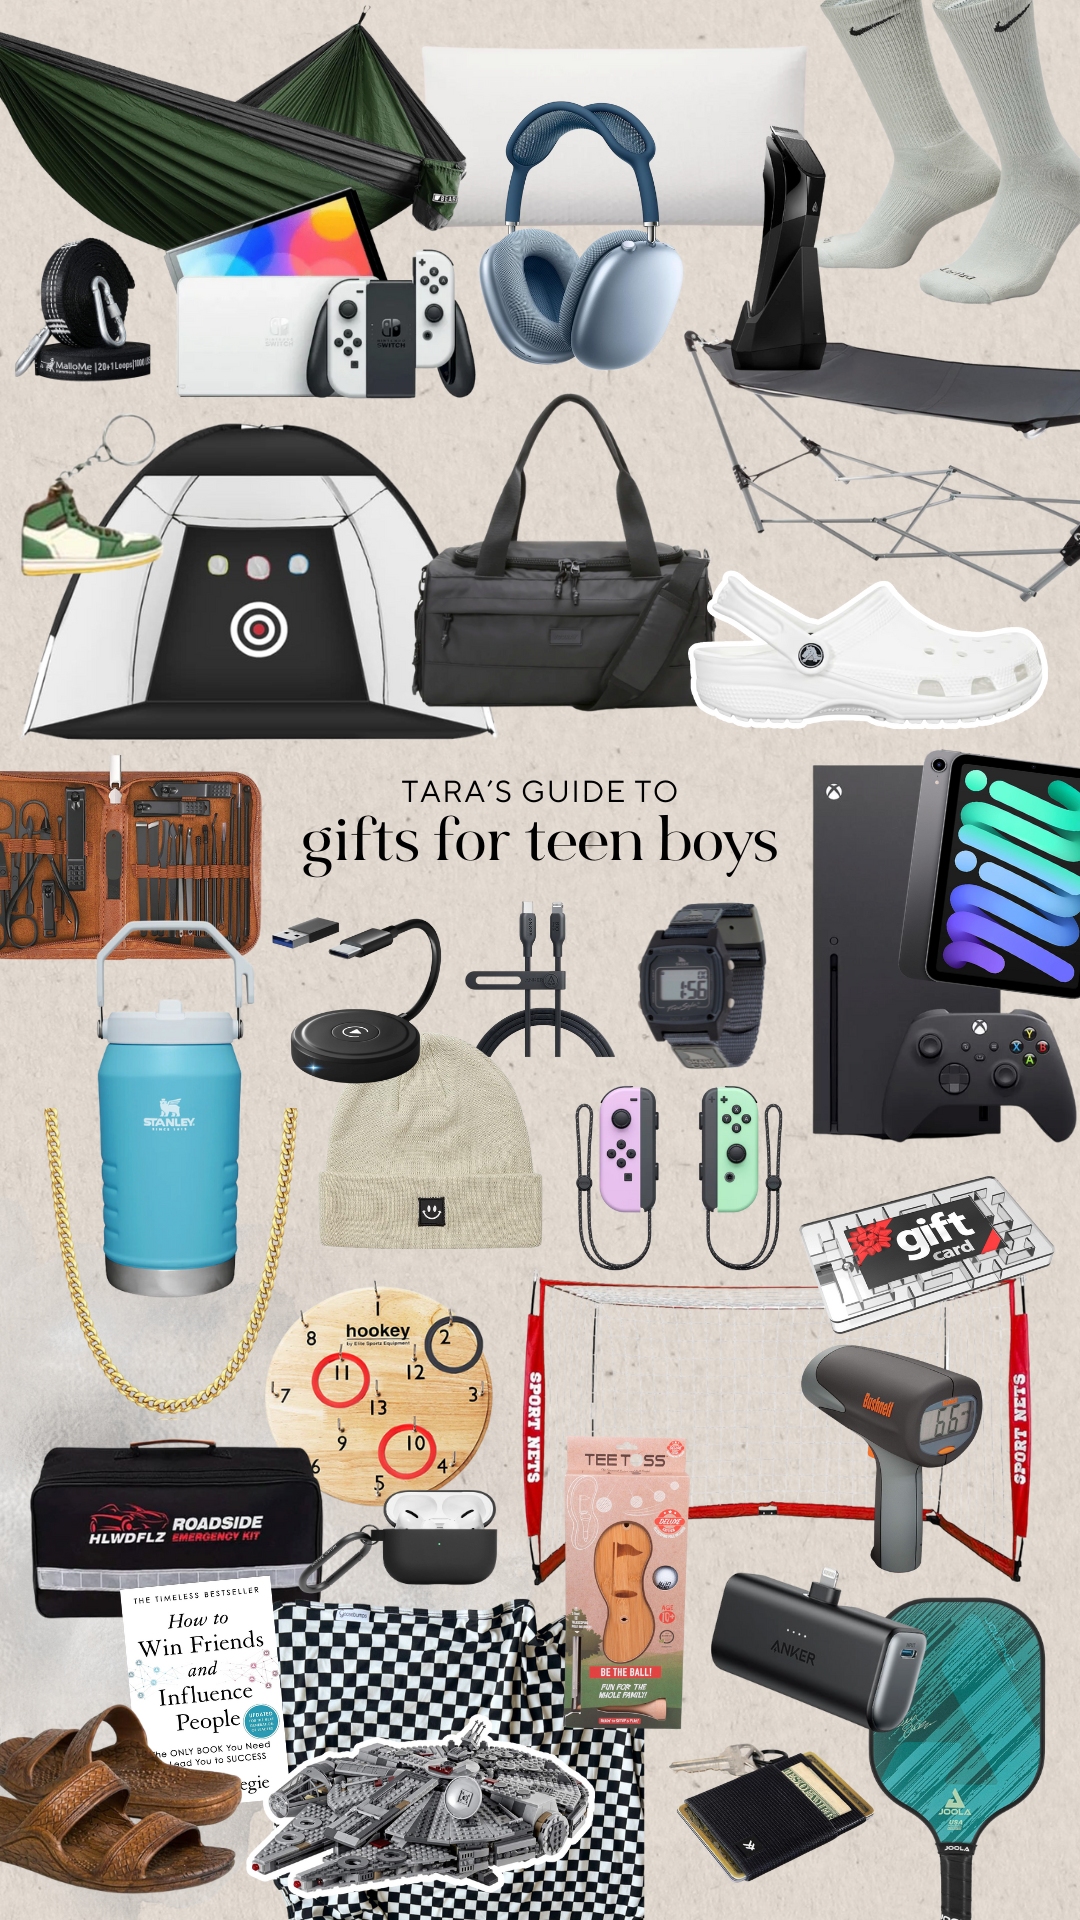 2023 Valentine's Day Gifts for Teens – Tara Thueson